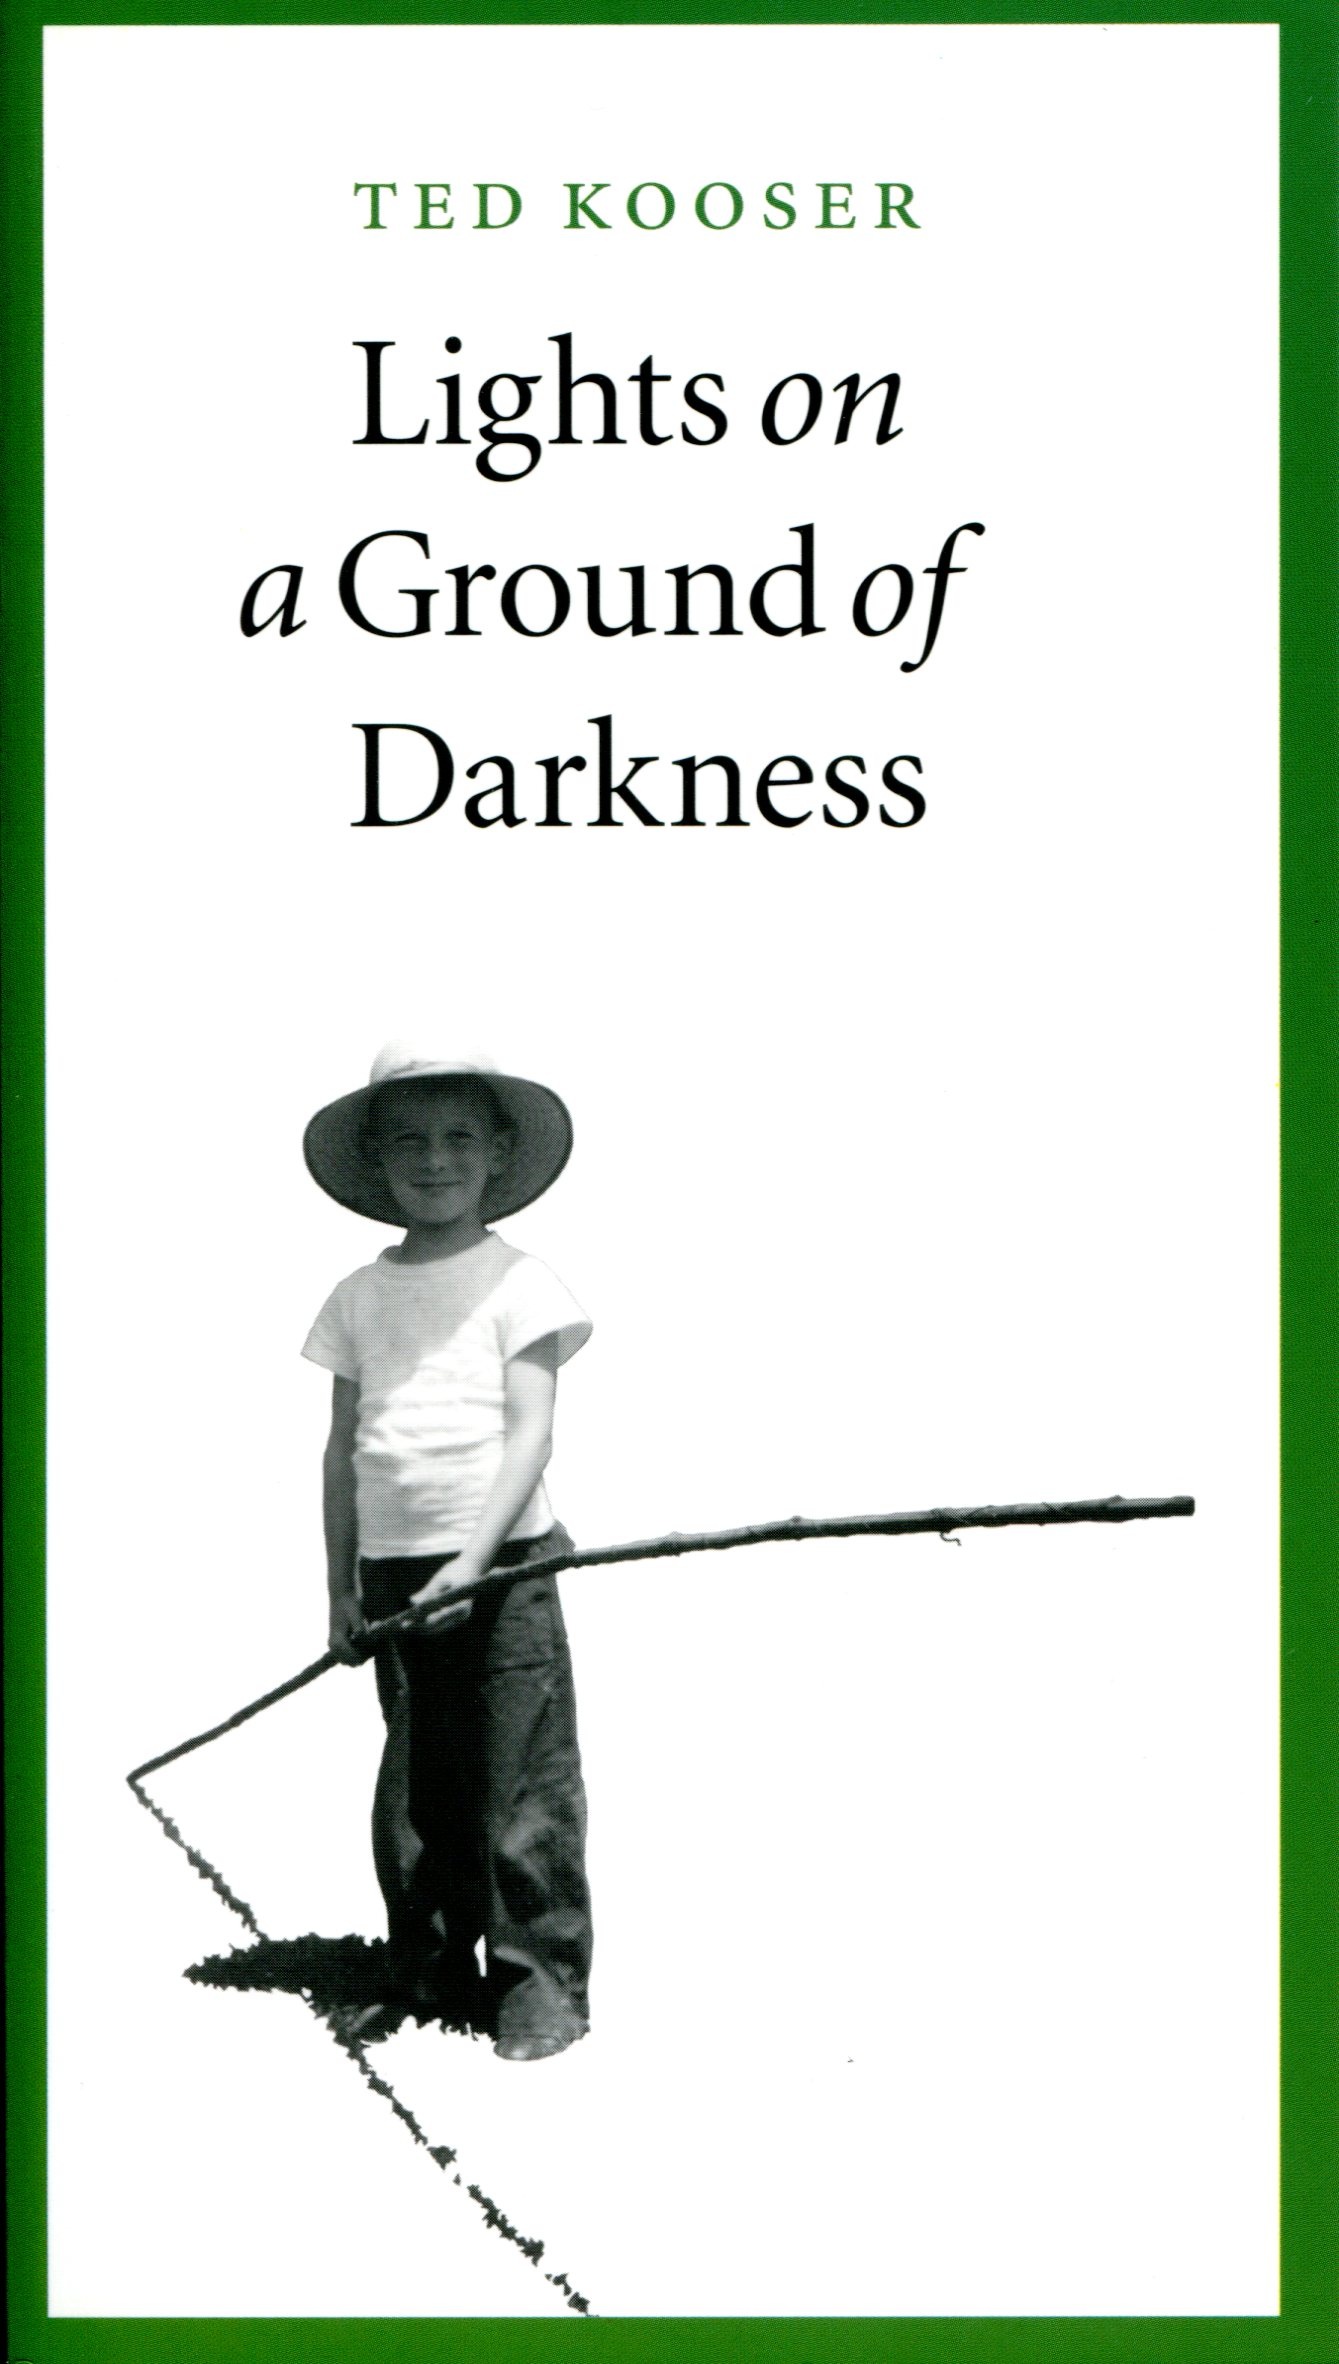 Lights on a Ground of Darkness by Ted Kooser